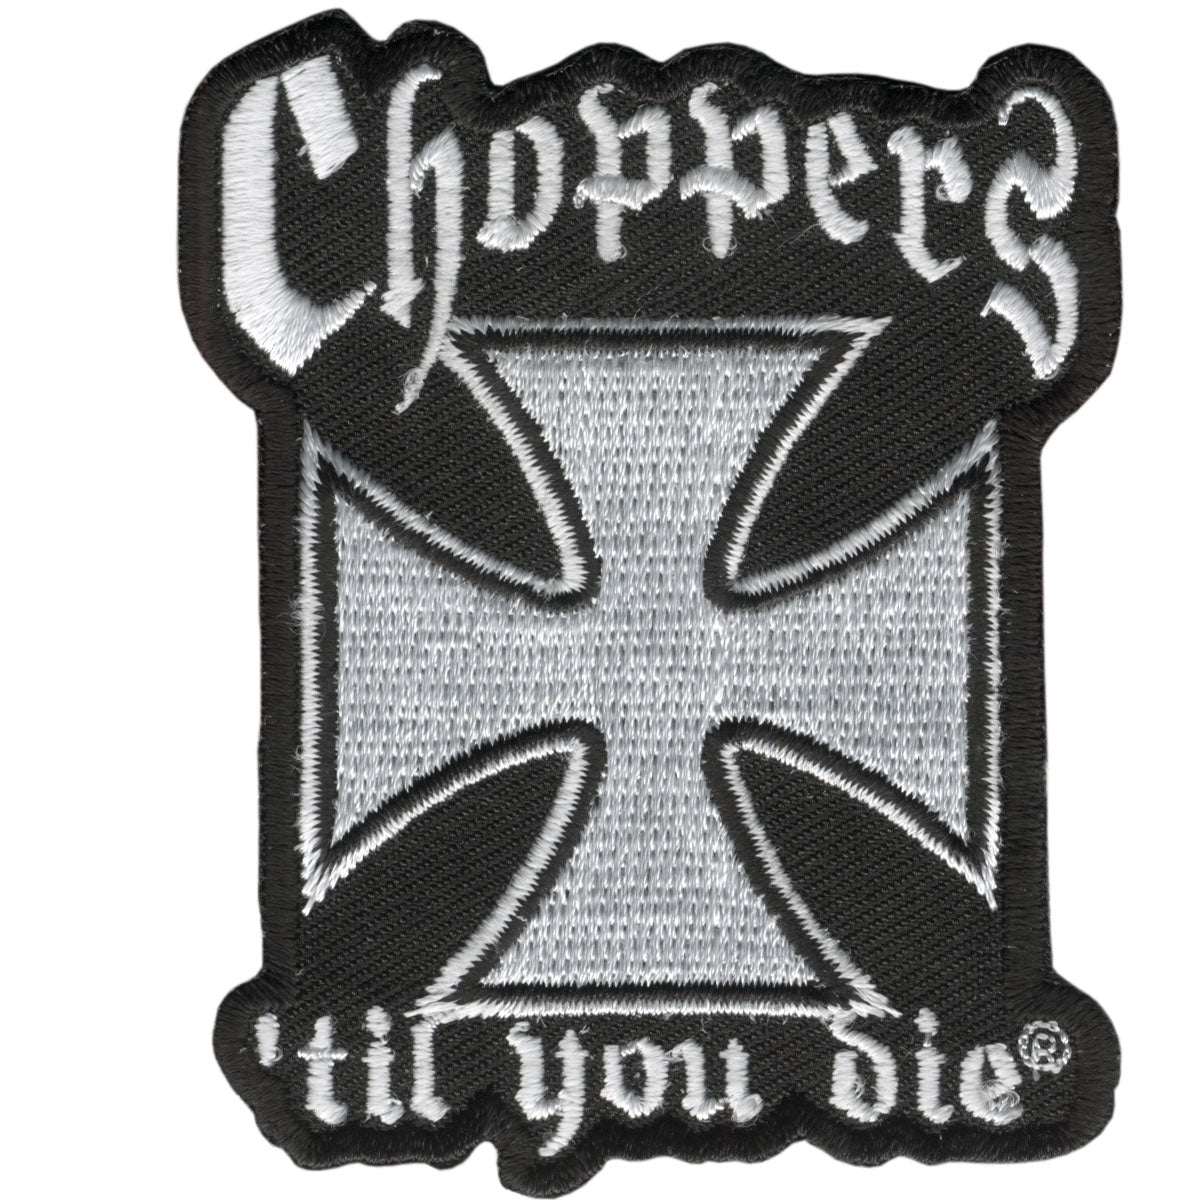 Hot Leathers Choppers Til You Die 3" x 3" Patch